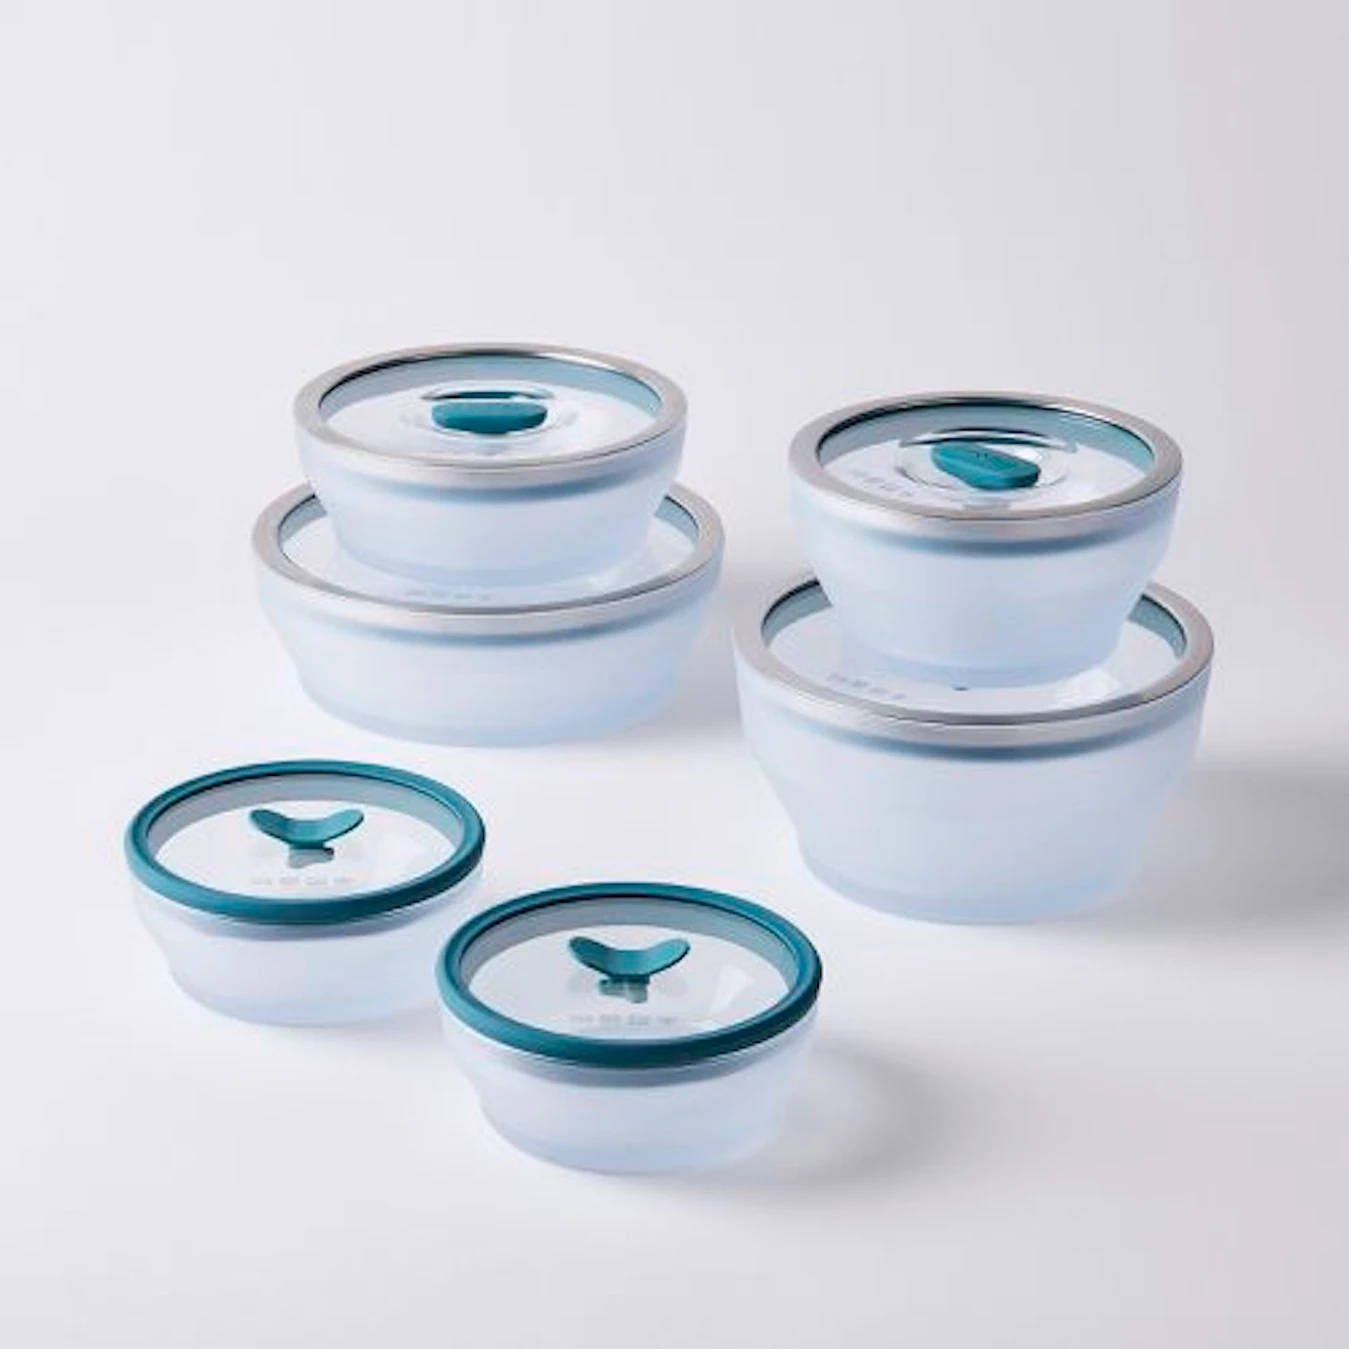 A set of six microwavable clear glass bowls with plastic and metal lids are stacked on top of one another.